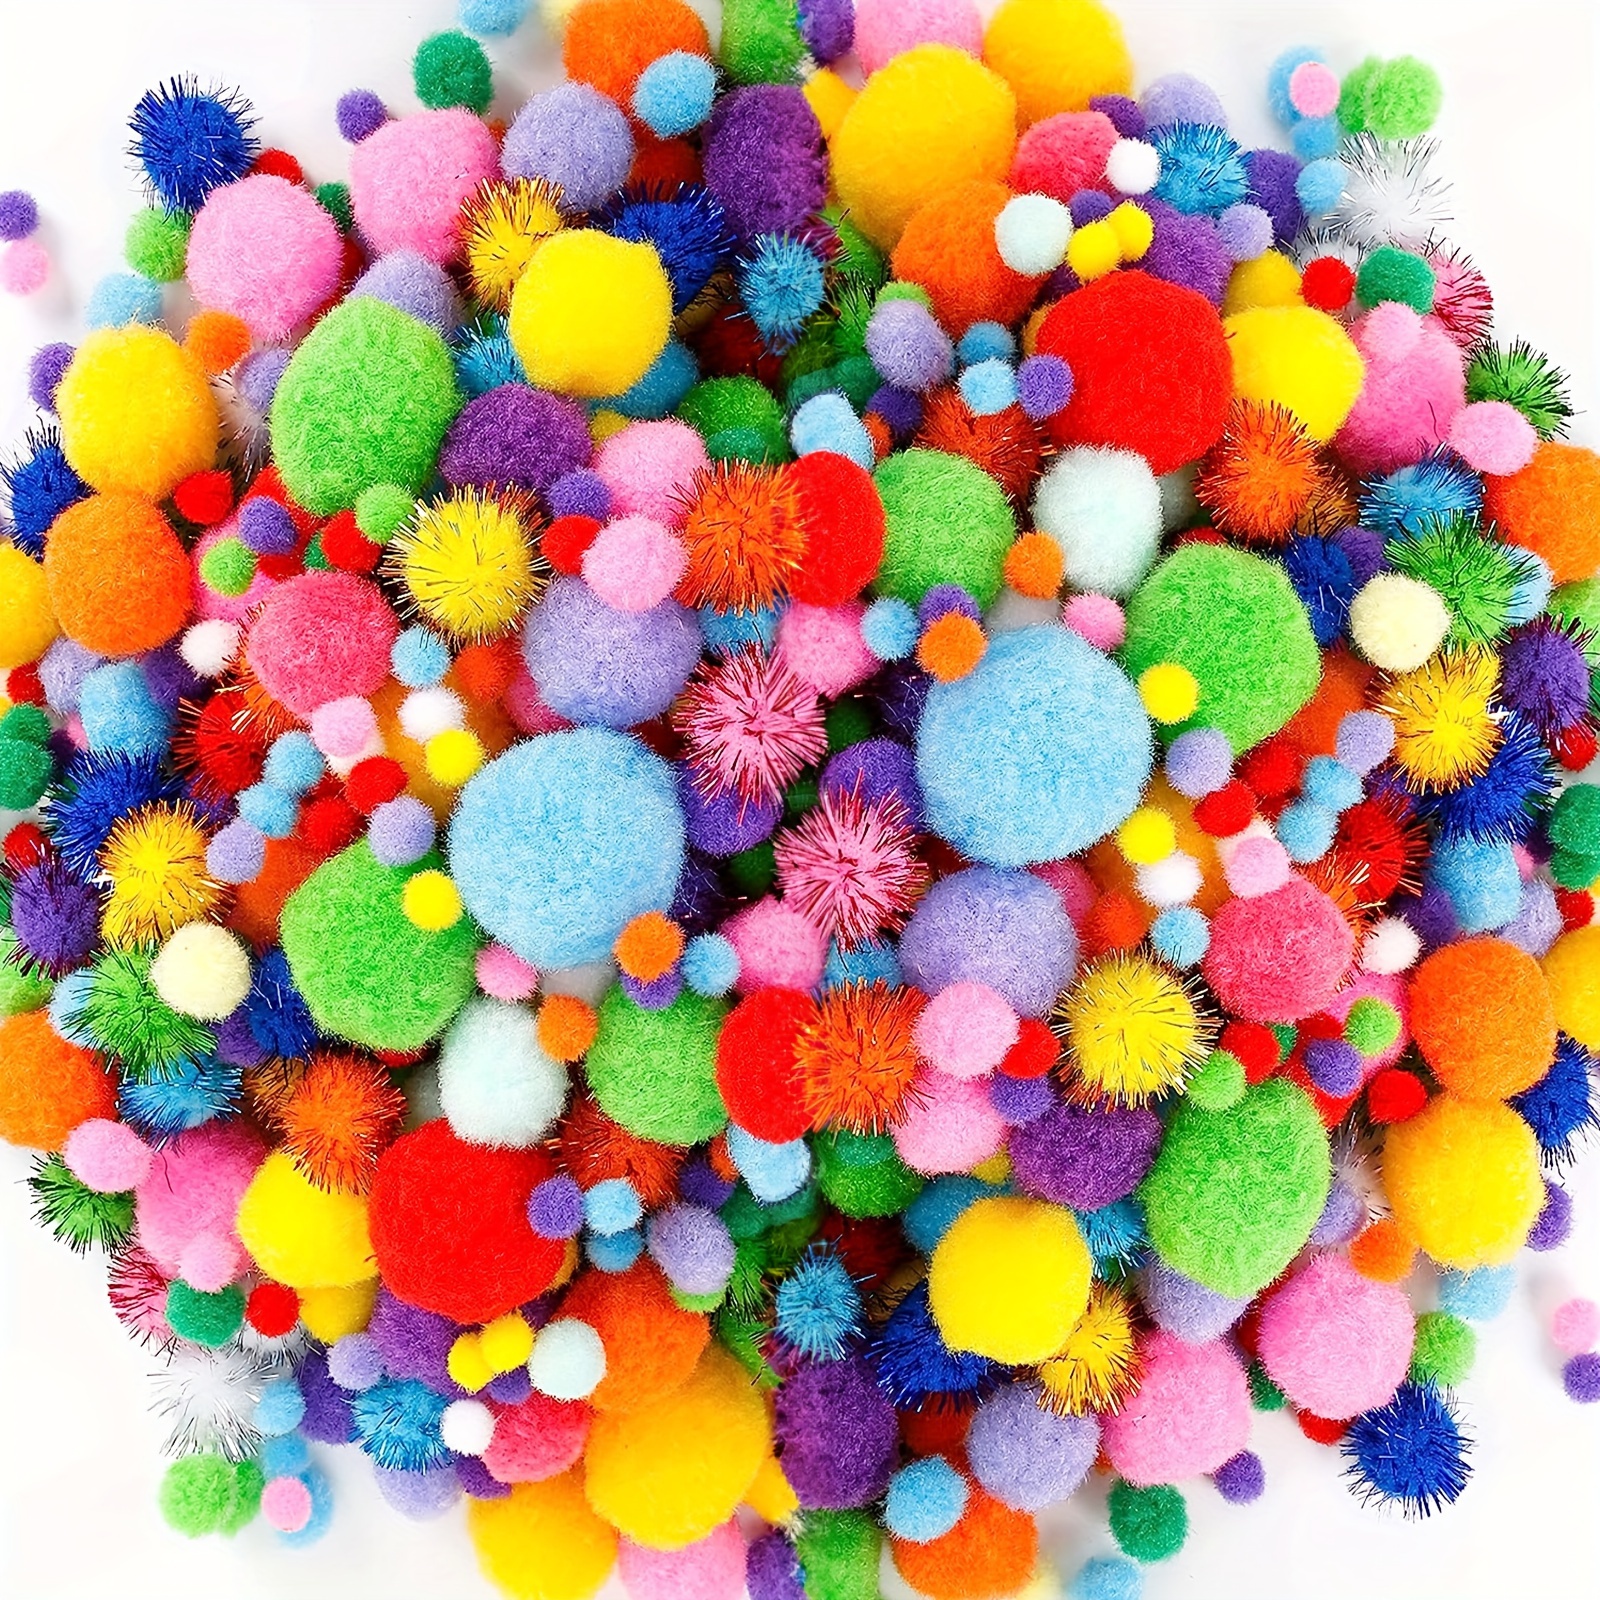 

1000pcs Multicolor Pom Poms, Pom Pom Balls Of Various Sizes And Colors, For Crafts Making Ornaments, Cultivating Creativity, Multicolor Decoration, Safe And Variable